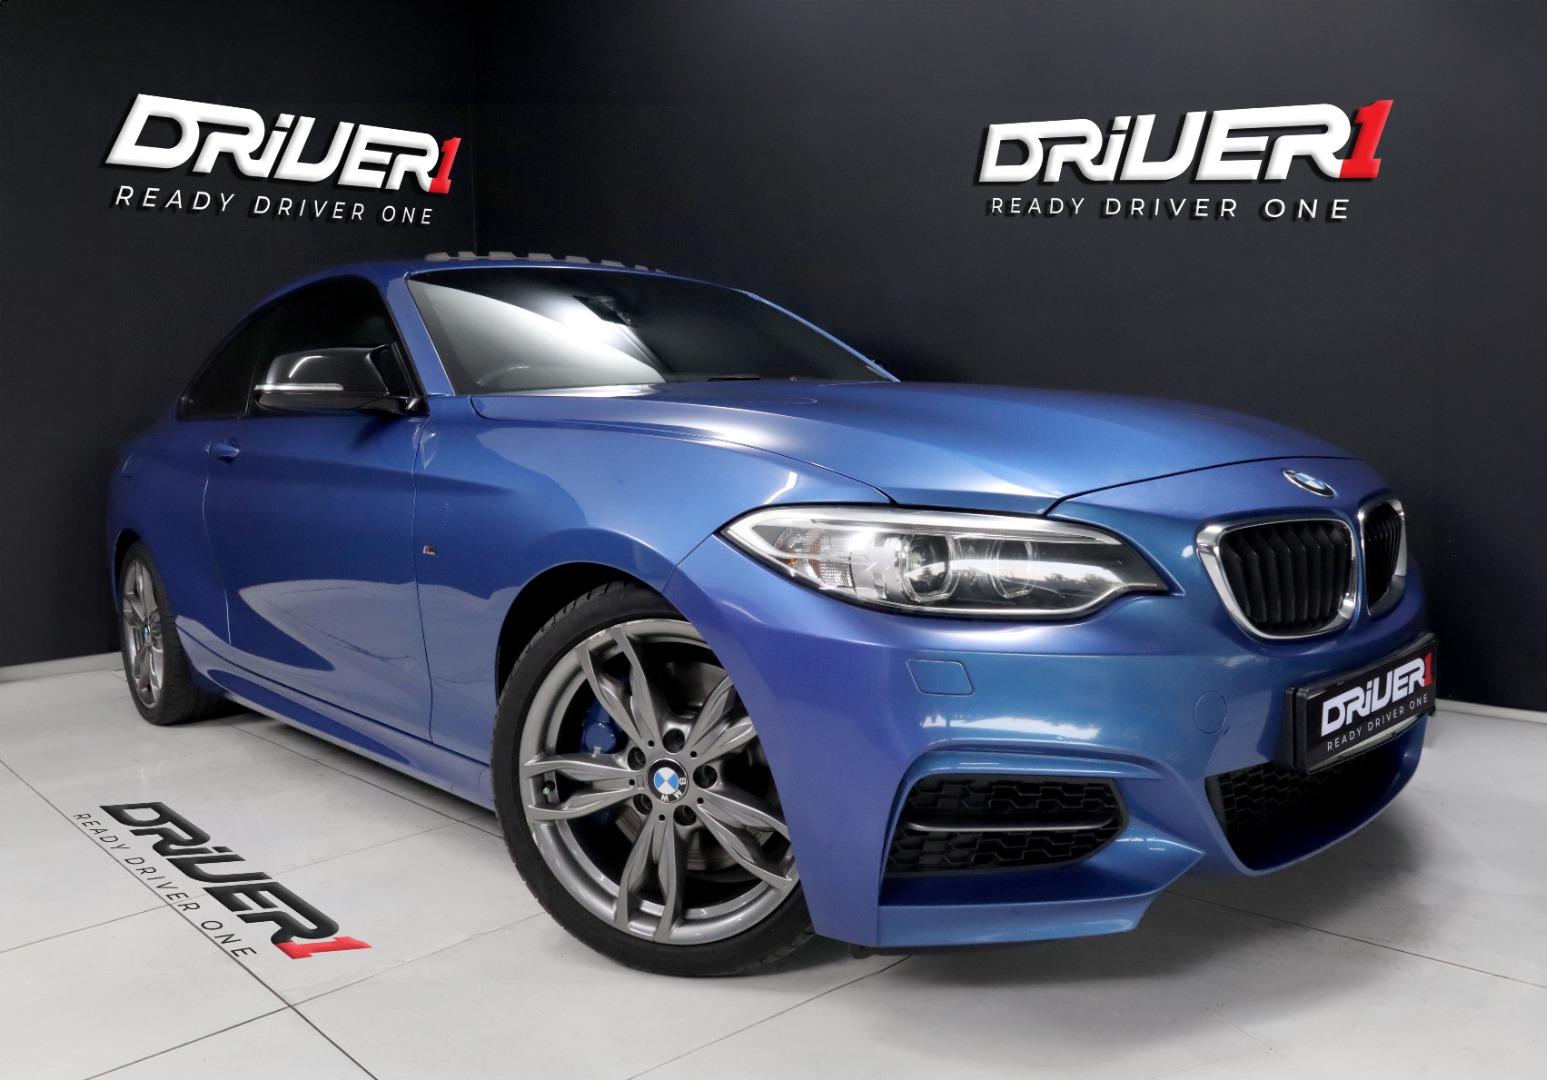 2014 BMW 2 Series Coupe M235i M Sport for sale - 343416